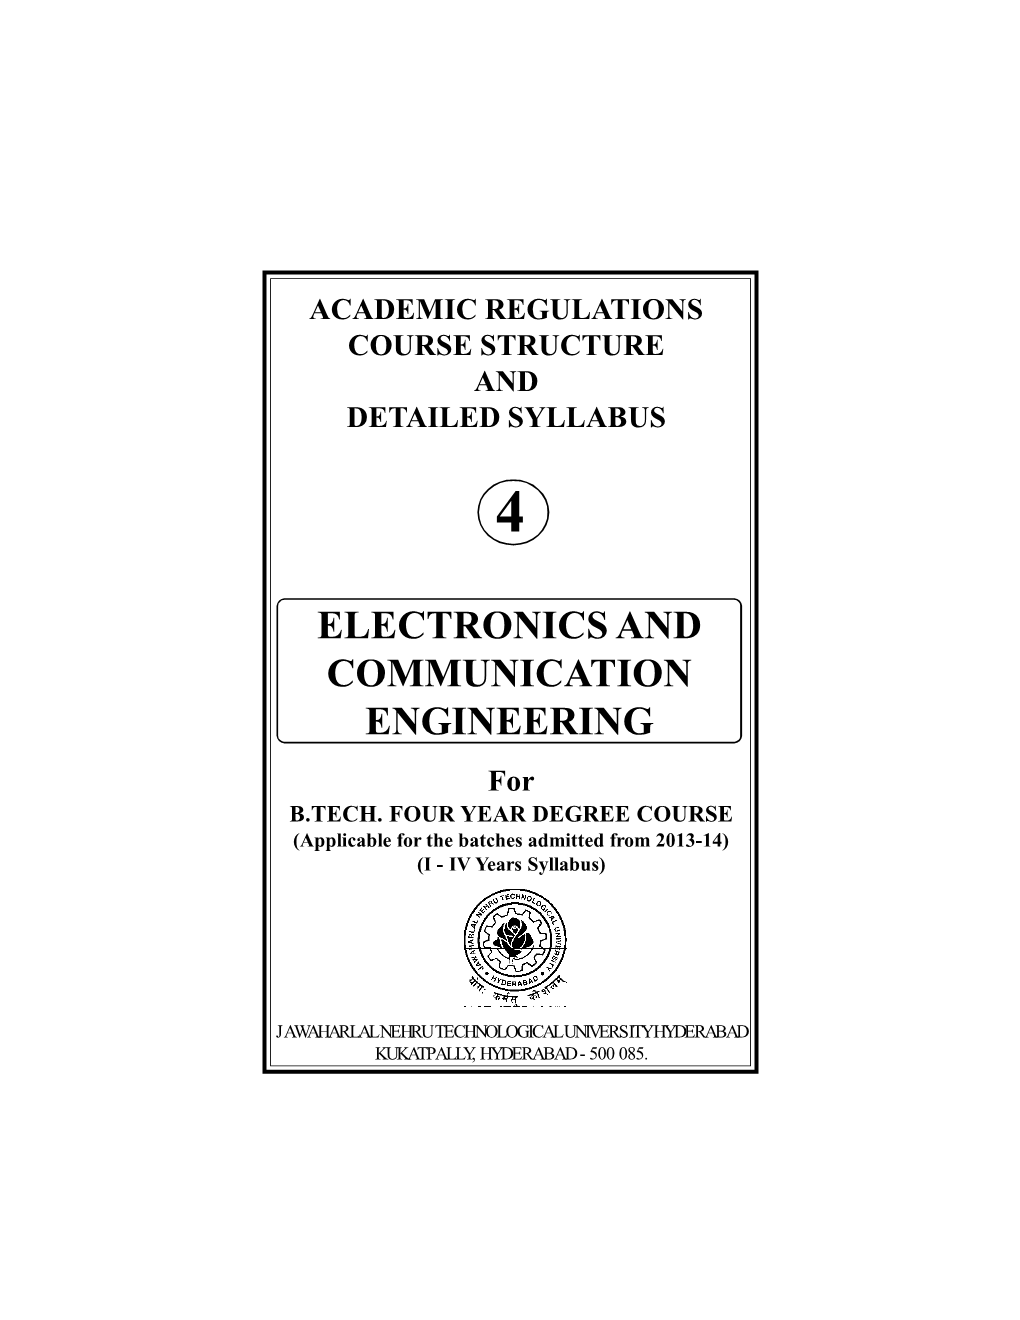 ELECTRONICS and COMMUNICATION ENGINEERING for B.TECH